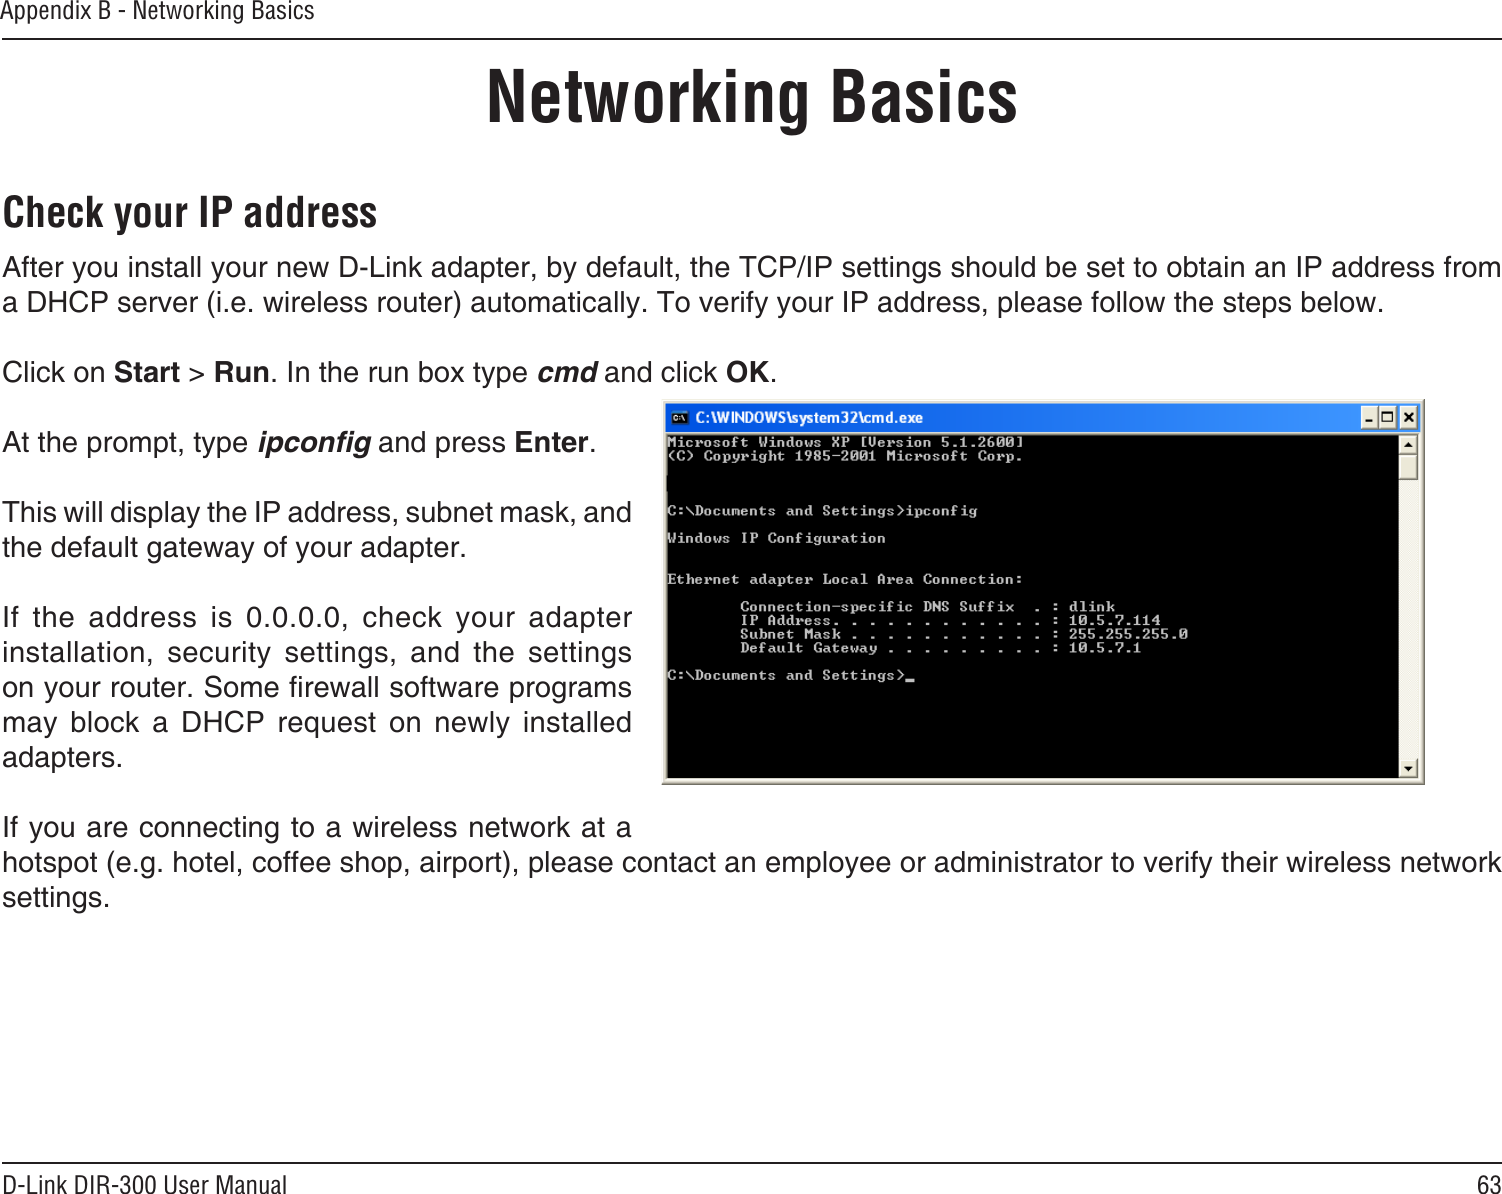 63D-Link DIR-300 User ManualAppendix B - Networking BasicsNetworking BasicsCheck your IP addressAfter you install your new D-Link adapter, by default, the TCP/IP settings should be set to obtain an IP address from a DHCP server (i.e. wireless router) automatically. To verify your IP address, please follow the steps below.Click on Start &gt; Run. In the run box type cmd and click OK.At the prompt, type ipconﬁg and press Enter.This will display the IP address, subnet mask, and the default gateway of your adapter.If  the  address  is  0.0.0.0,  check  your  adapter installation,  security  settings,  and  the  settings on your router. Some rewall software programs may  block  a  DHCP  request  on  newly  installed adapters. If you are connecting to a wireless network at a hotspot (e.g. hotel, coffee shop, airport), please contact an employee or administrator to verify their wireless network settings.